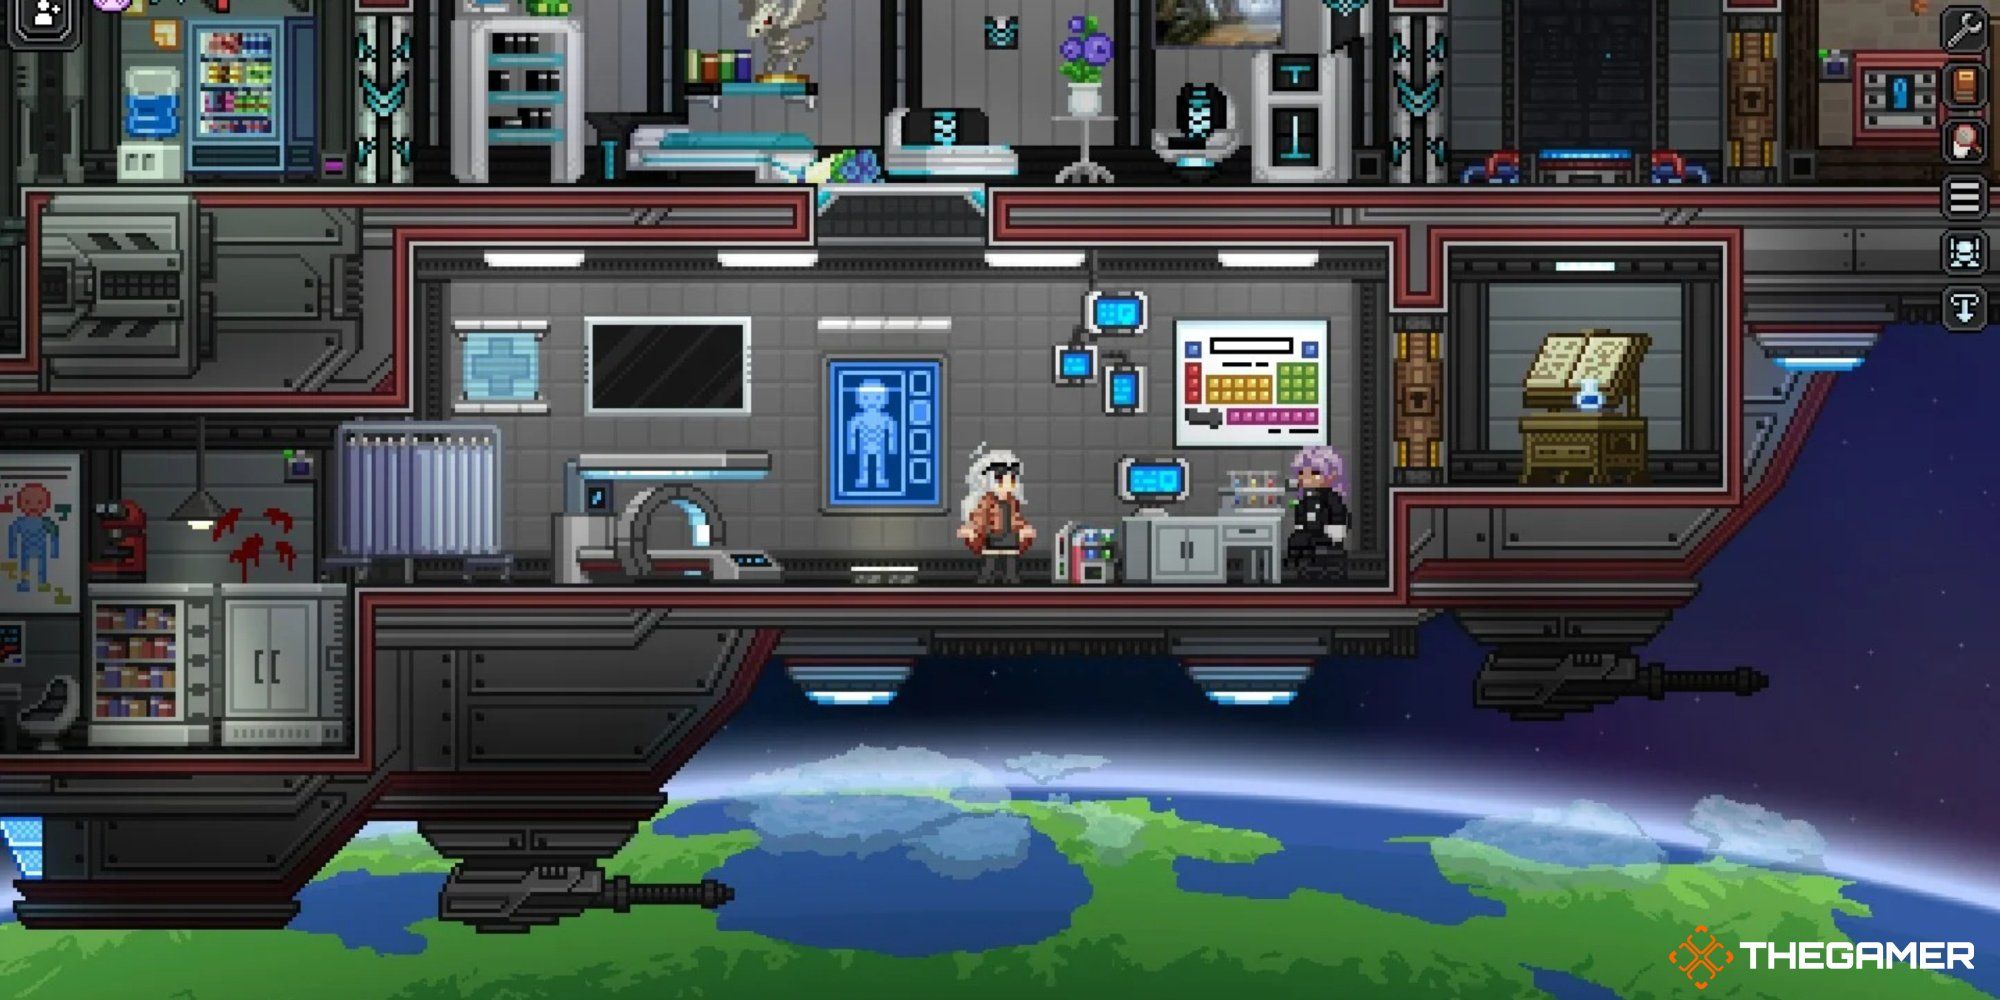 A screenshot showing the Starbound colony in space